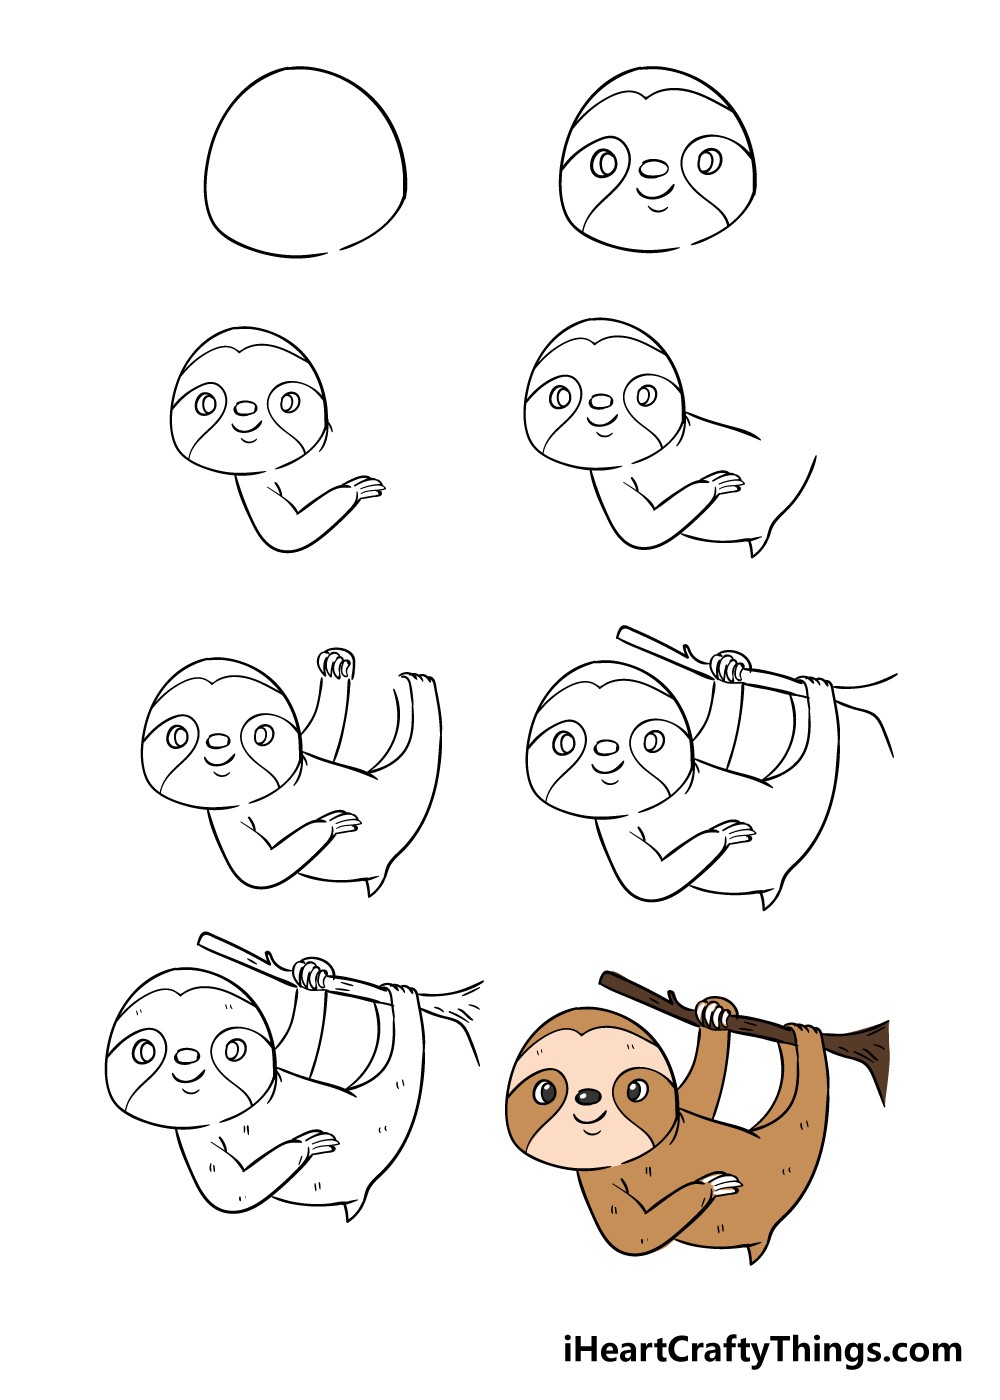 How to draw A cute Sloth